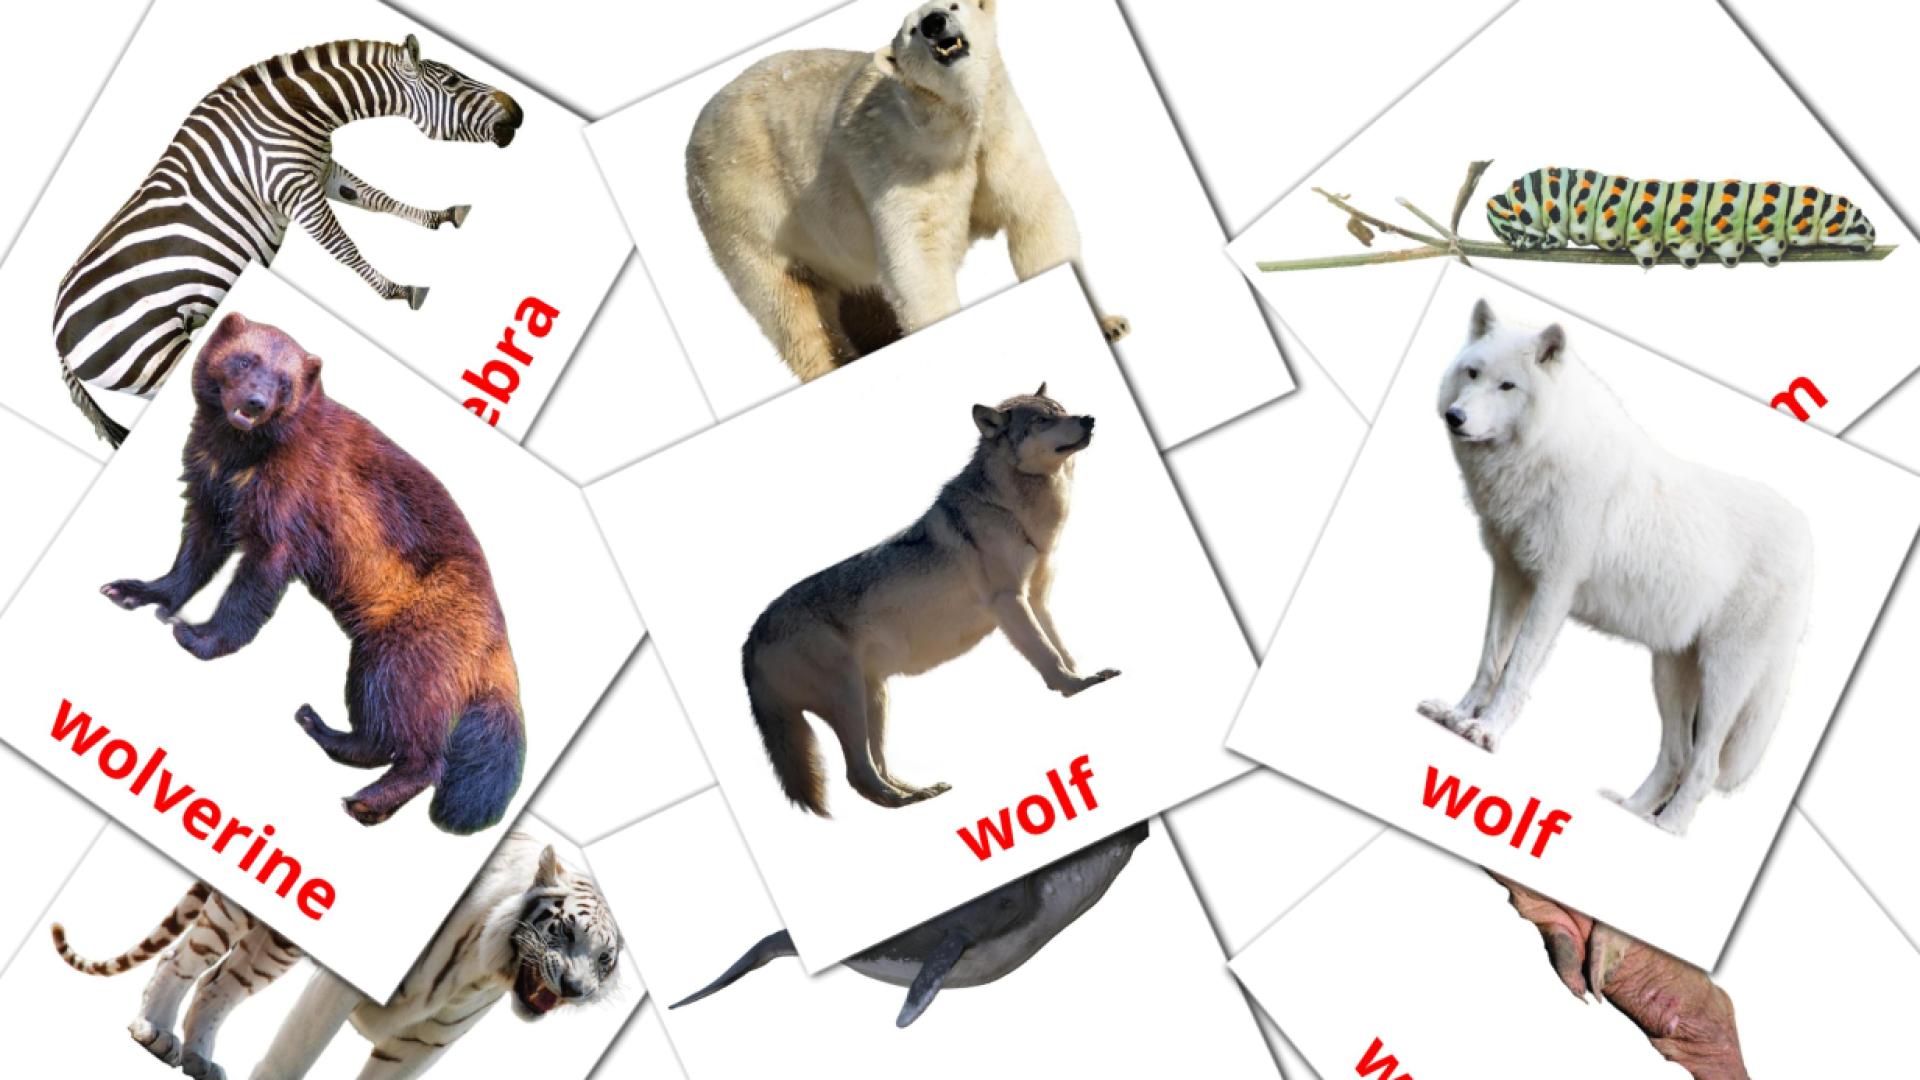 Diere afrikaans vocabulary flashcards